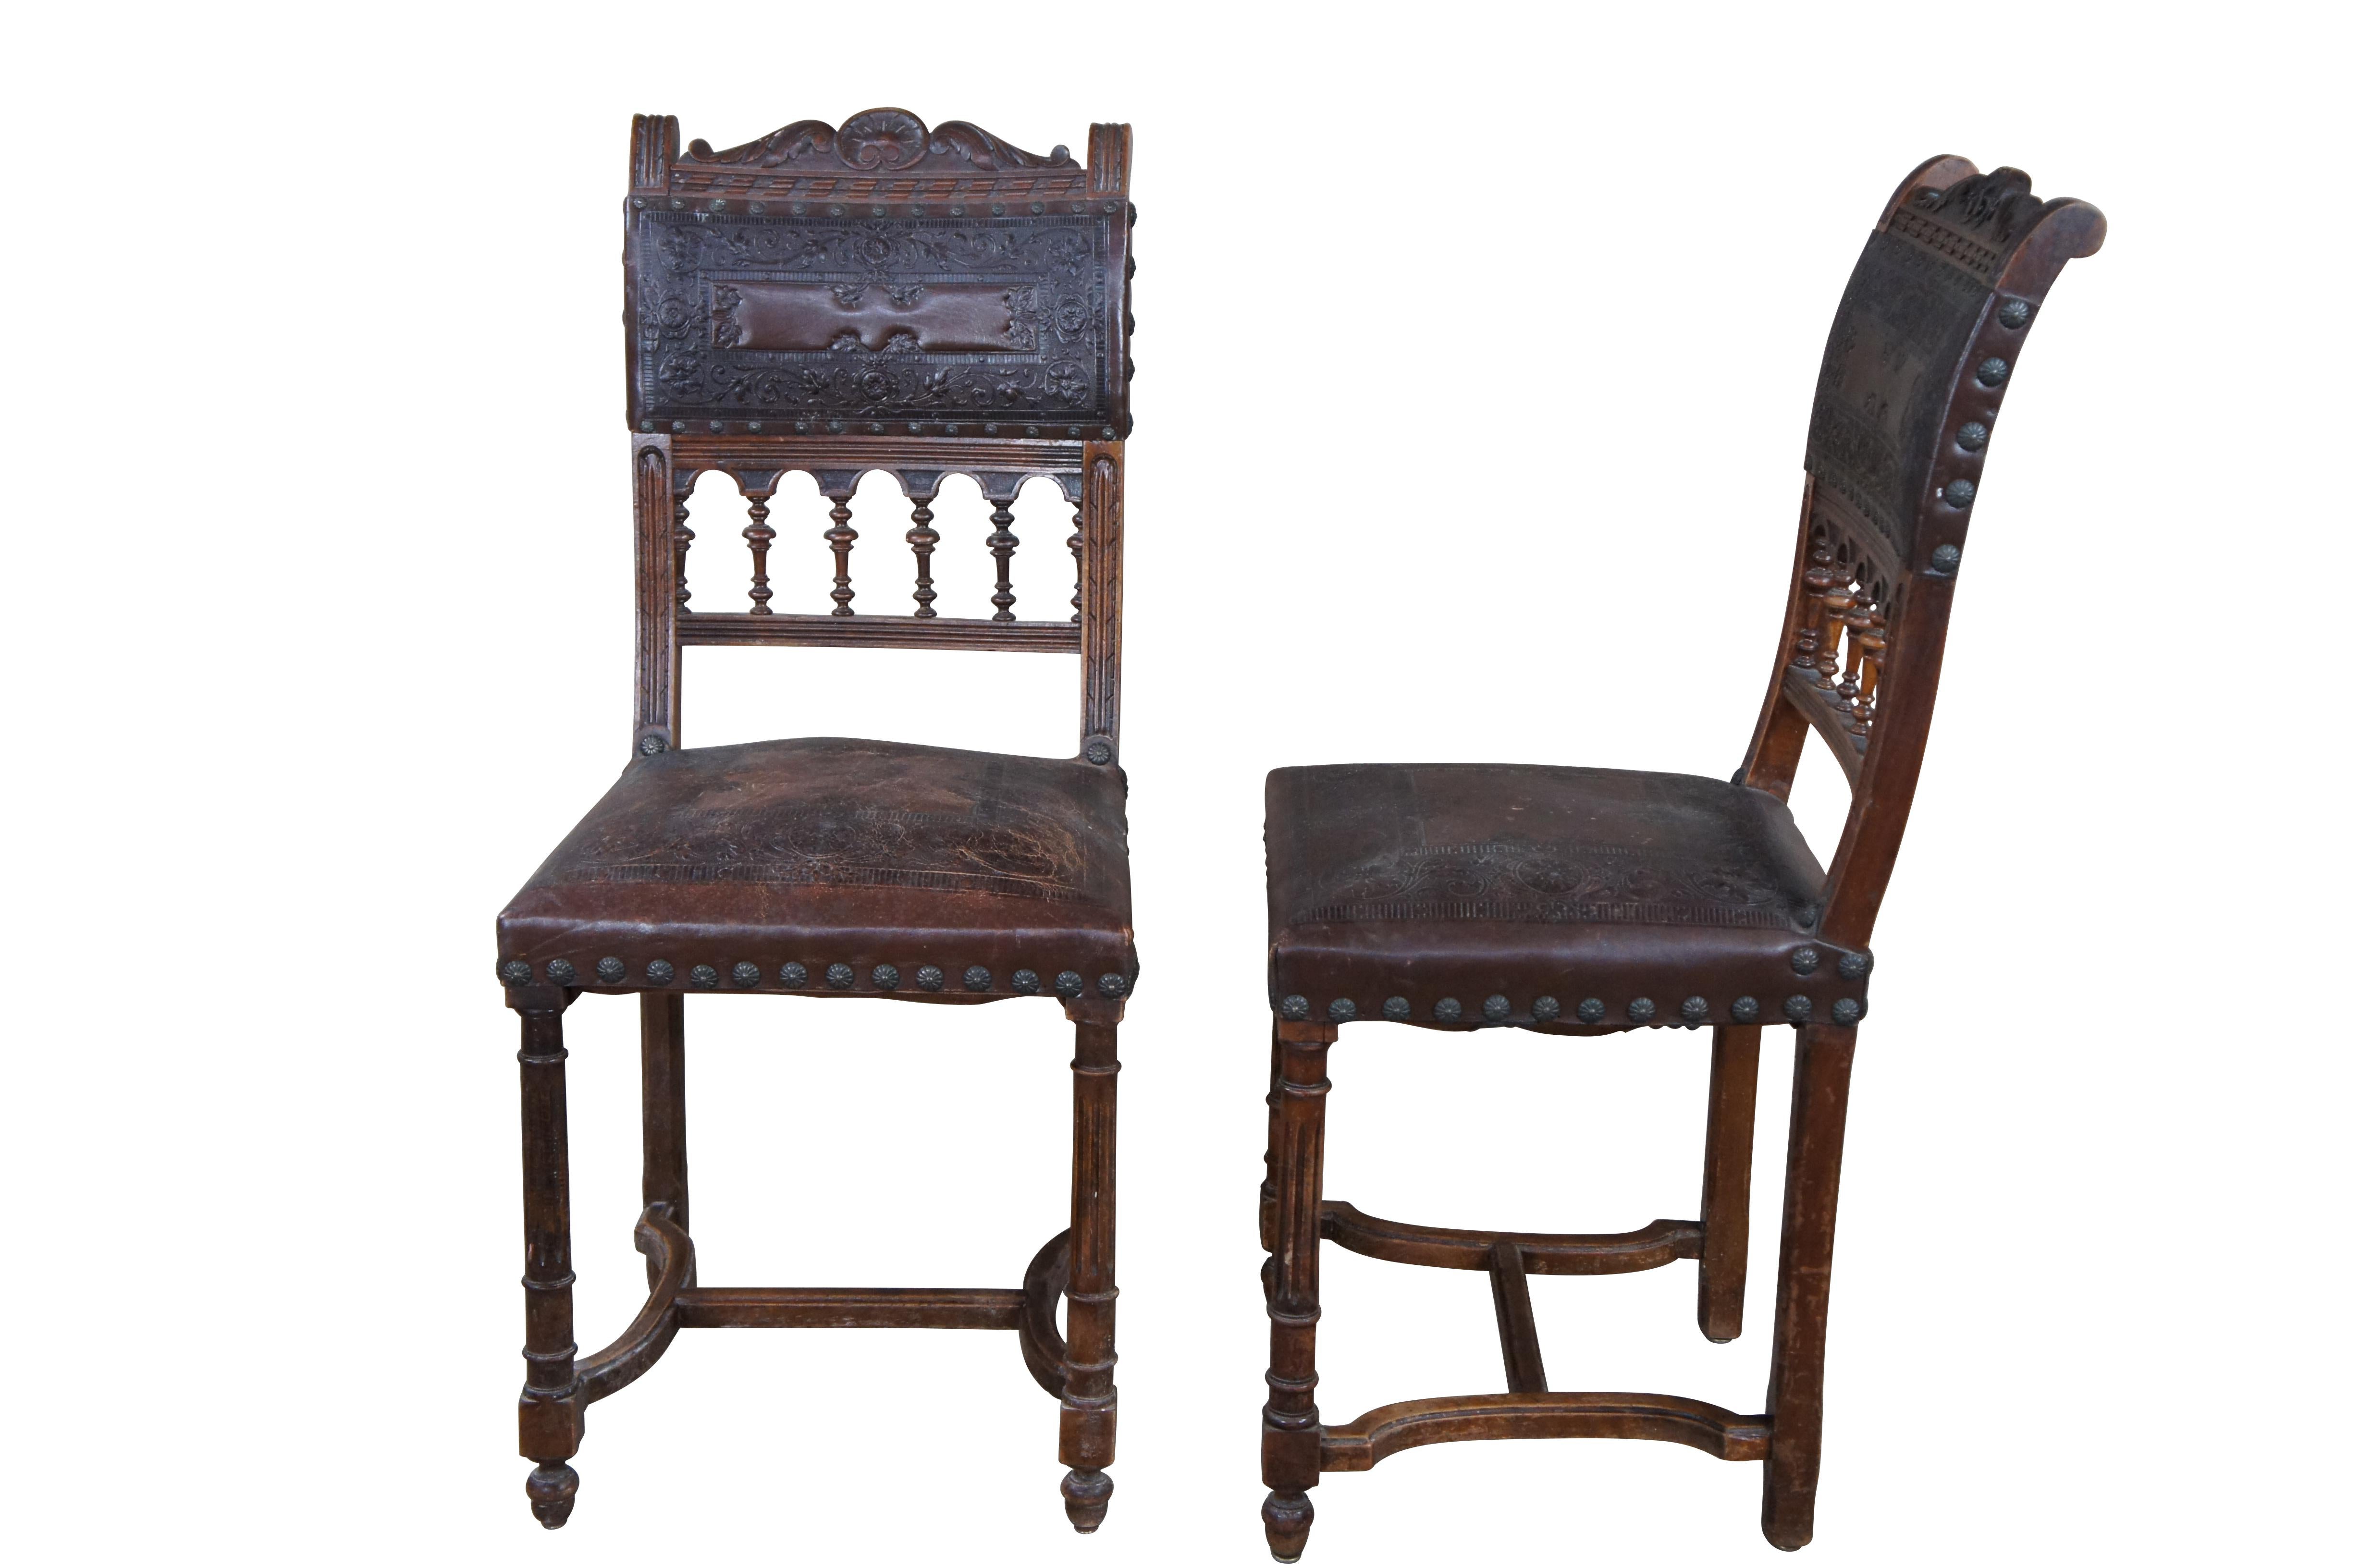 An antique set of 5 French Henry II style dining side chairs, circa 1880s.  Features an oak frame with embossed leather seat and back with pierced lower arcade accented by ornate spindles.  Each chair had nailhead trim and fluted legs leading to an